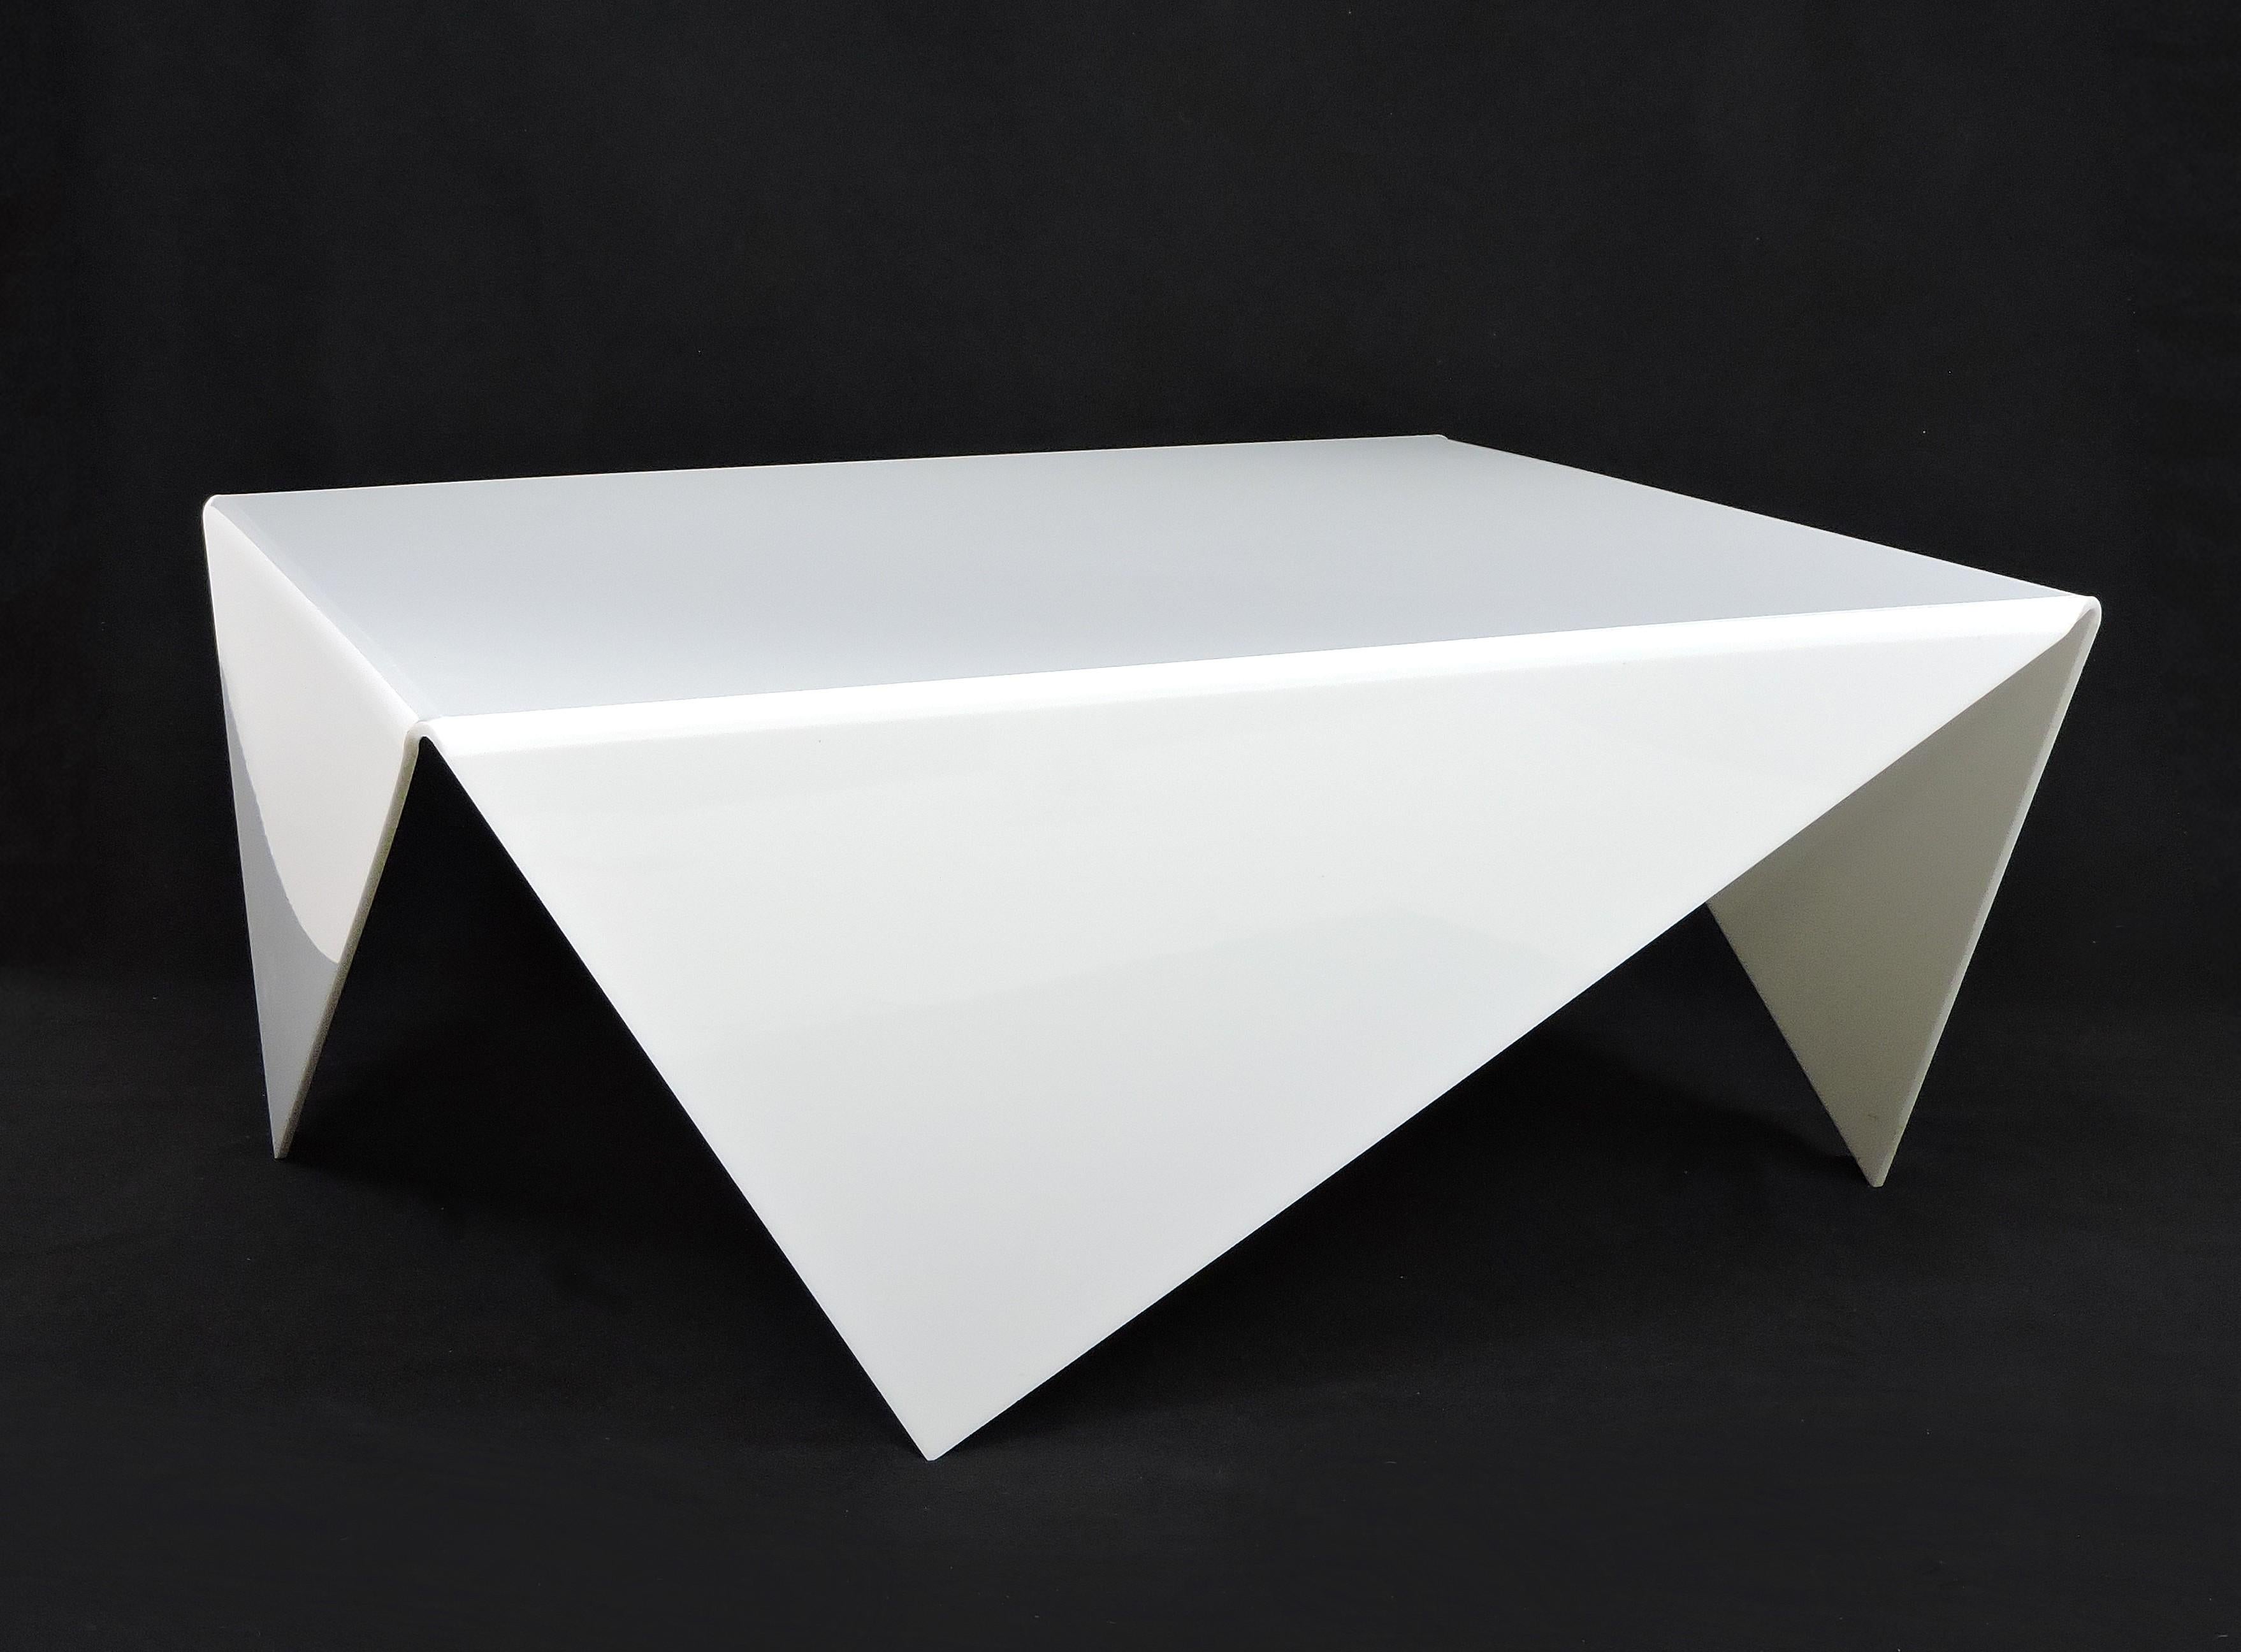 Striking coffee table made from white acrylic in the style of the Mouchoir table designed by Bertin France in the 1970s. The difference is that the design of this table is slightly larger and the sides are asymmetrical rather than symmetrical